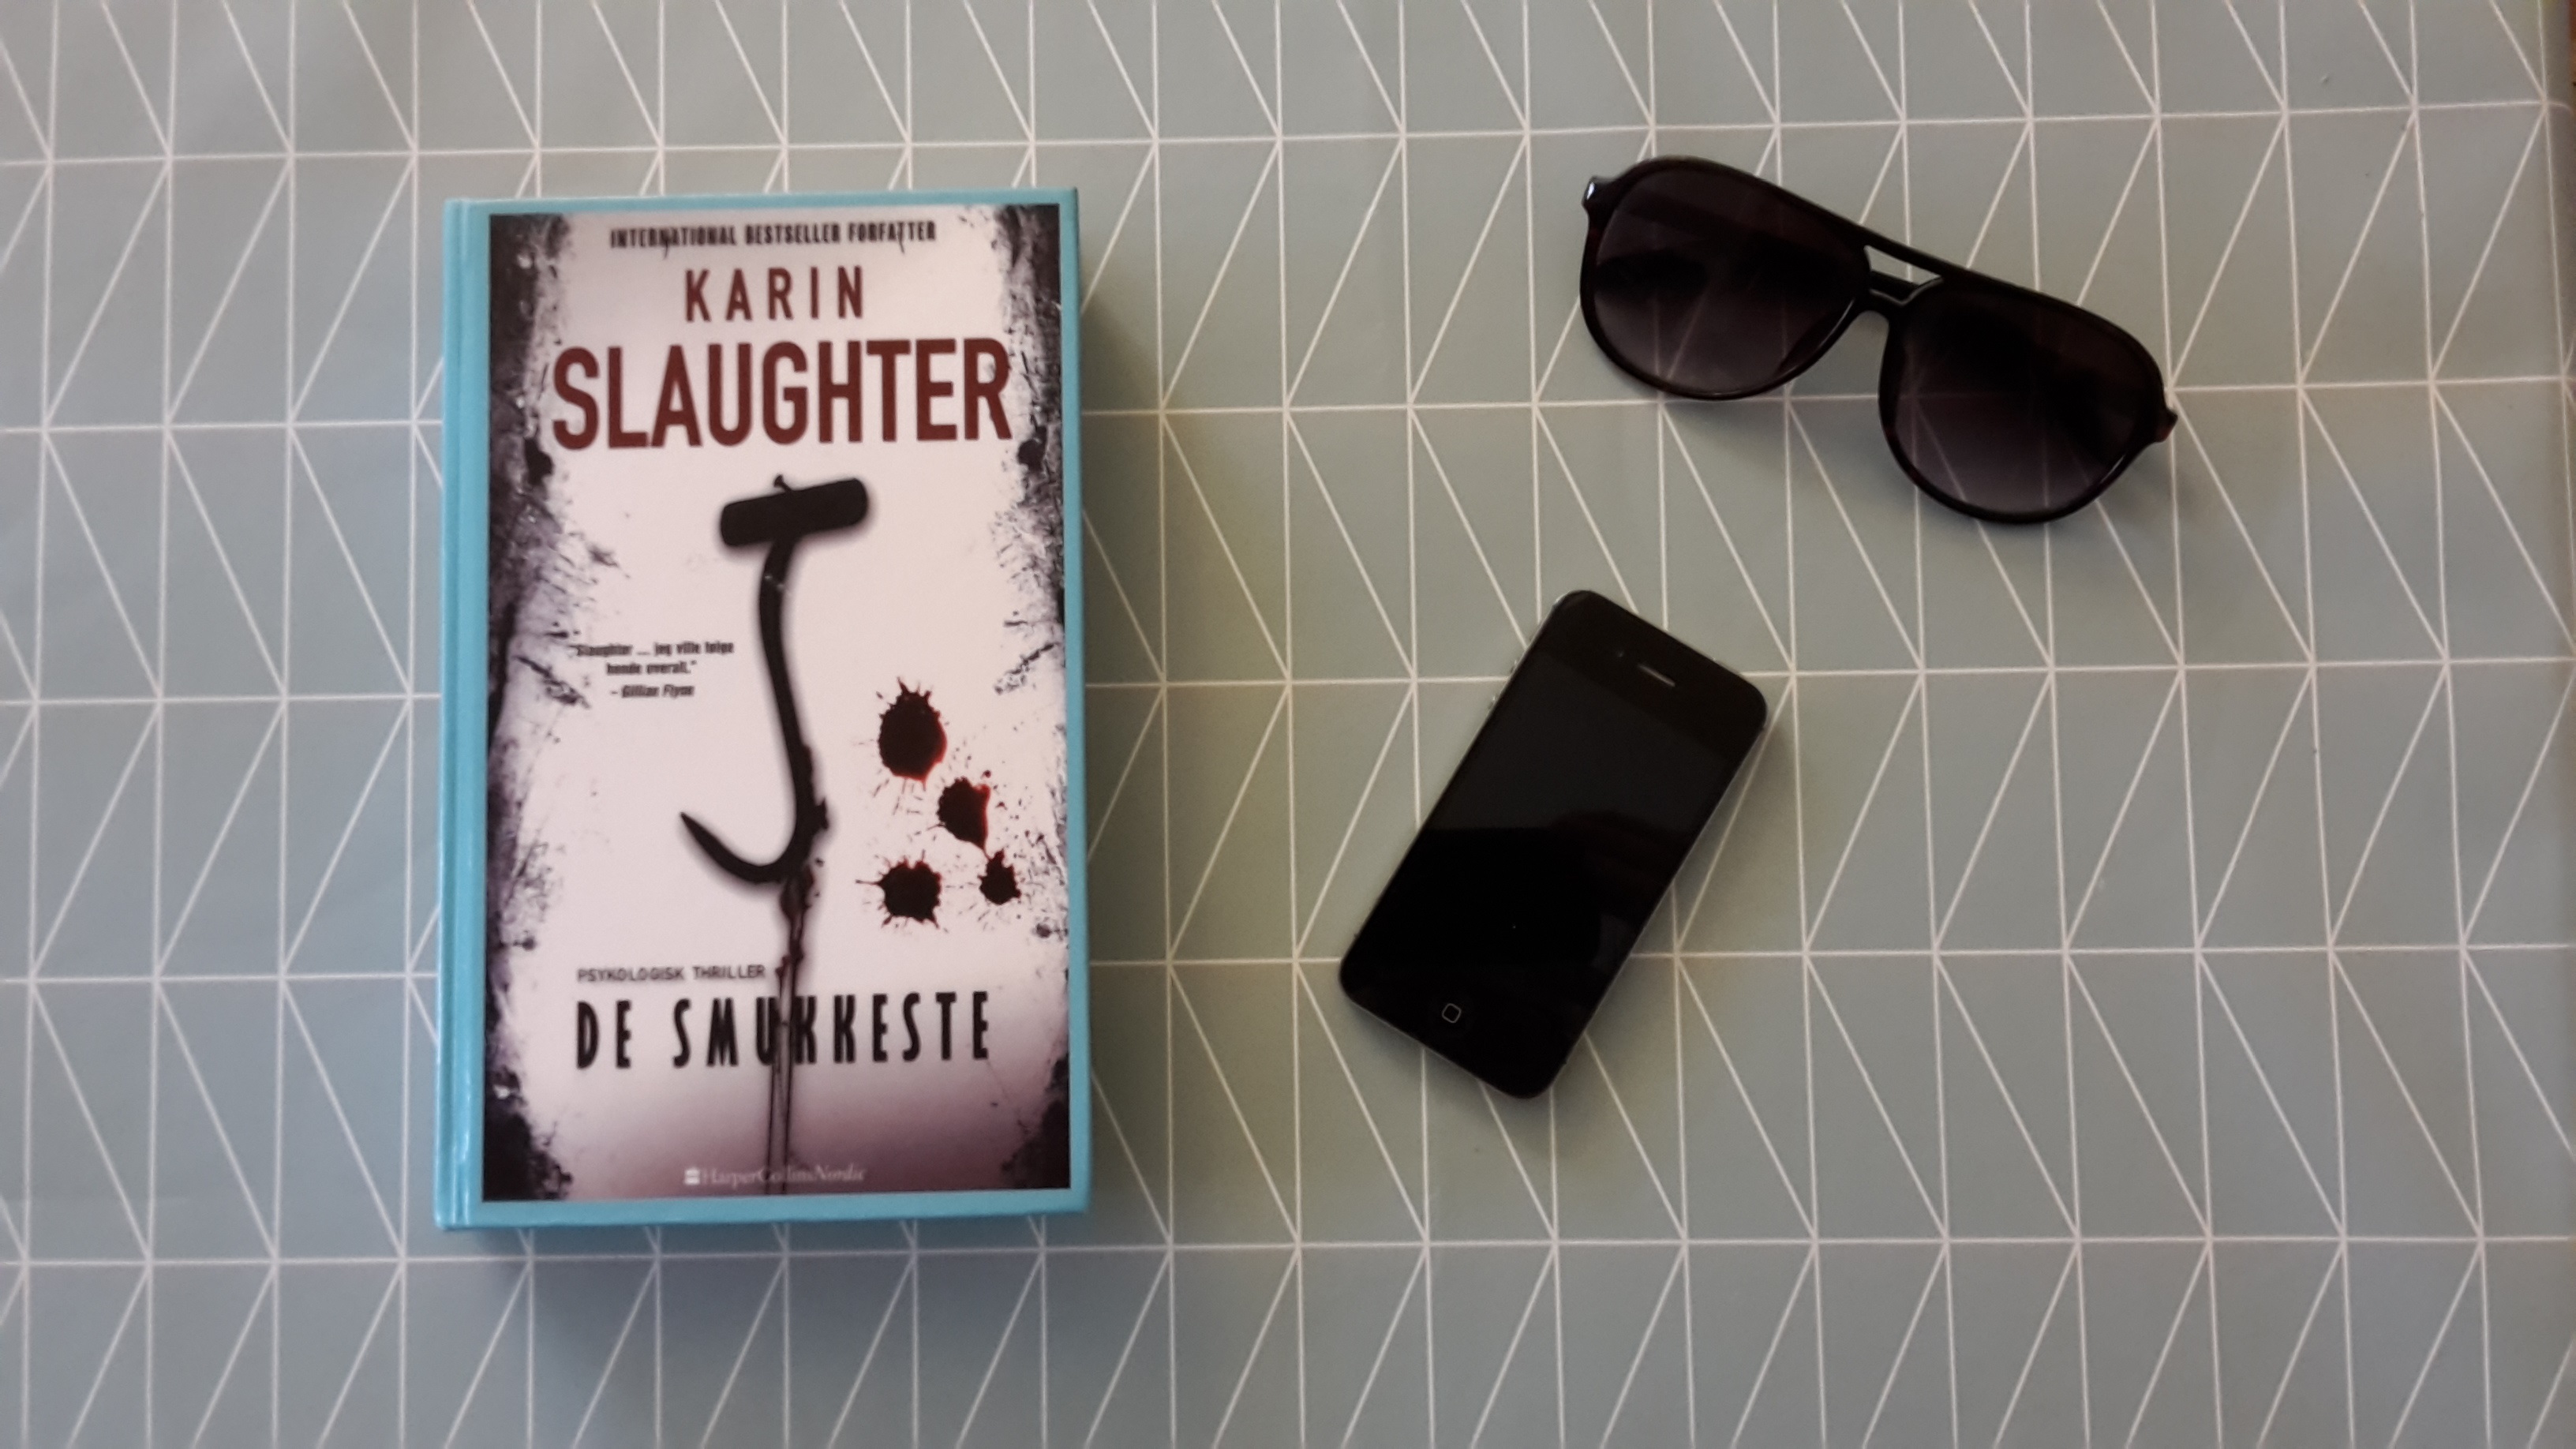 The book Pretty Girls by Karin Slaughter lies on a table with a smart phone and a pair of sunglasses. The table is covered in a blue table cloth.